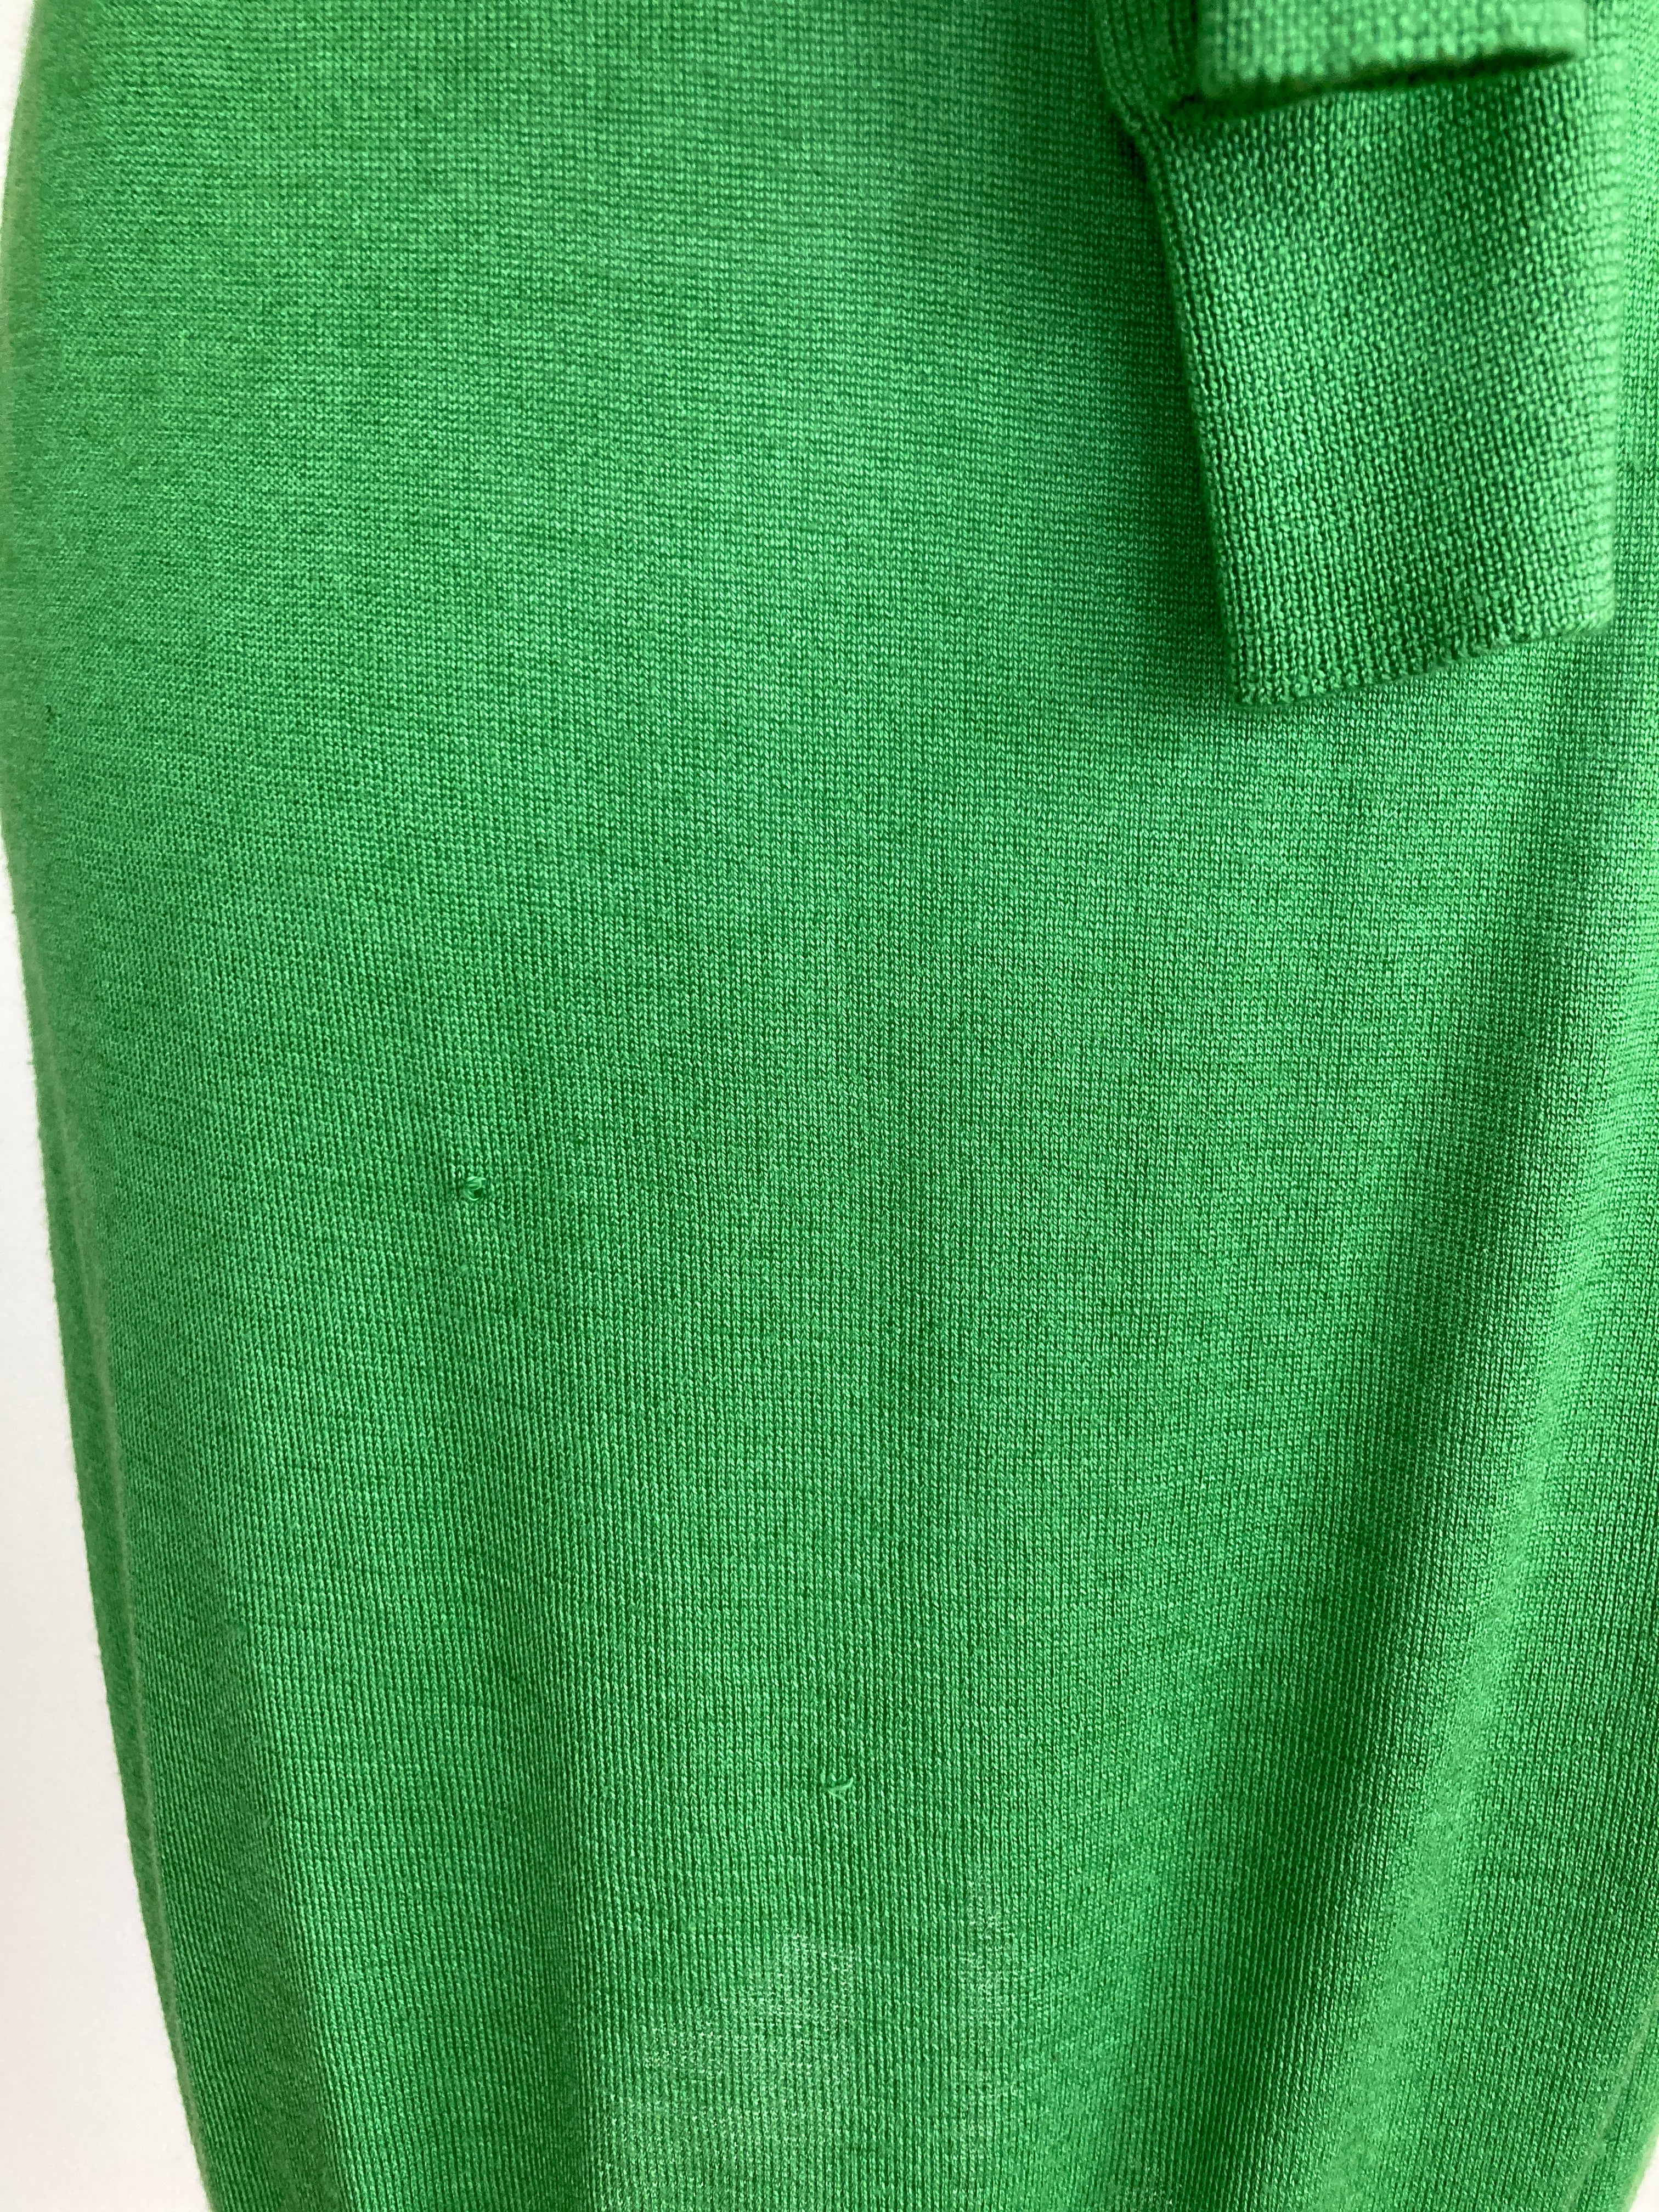 Thakoon Green Knit  with Tie Neck Dress, S